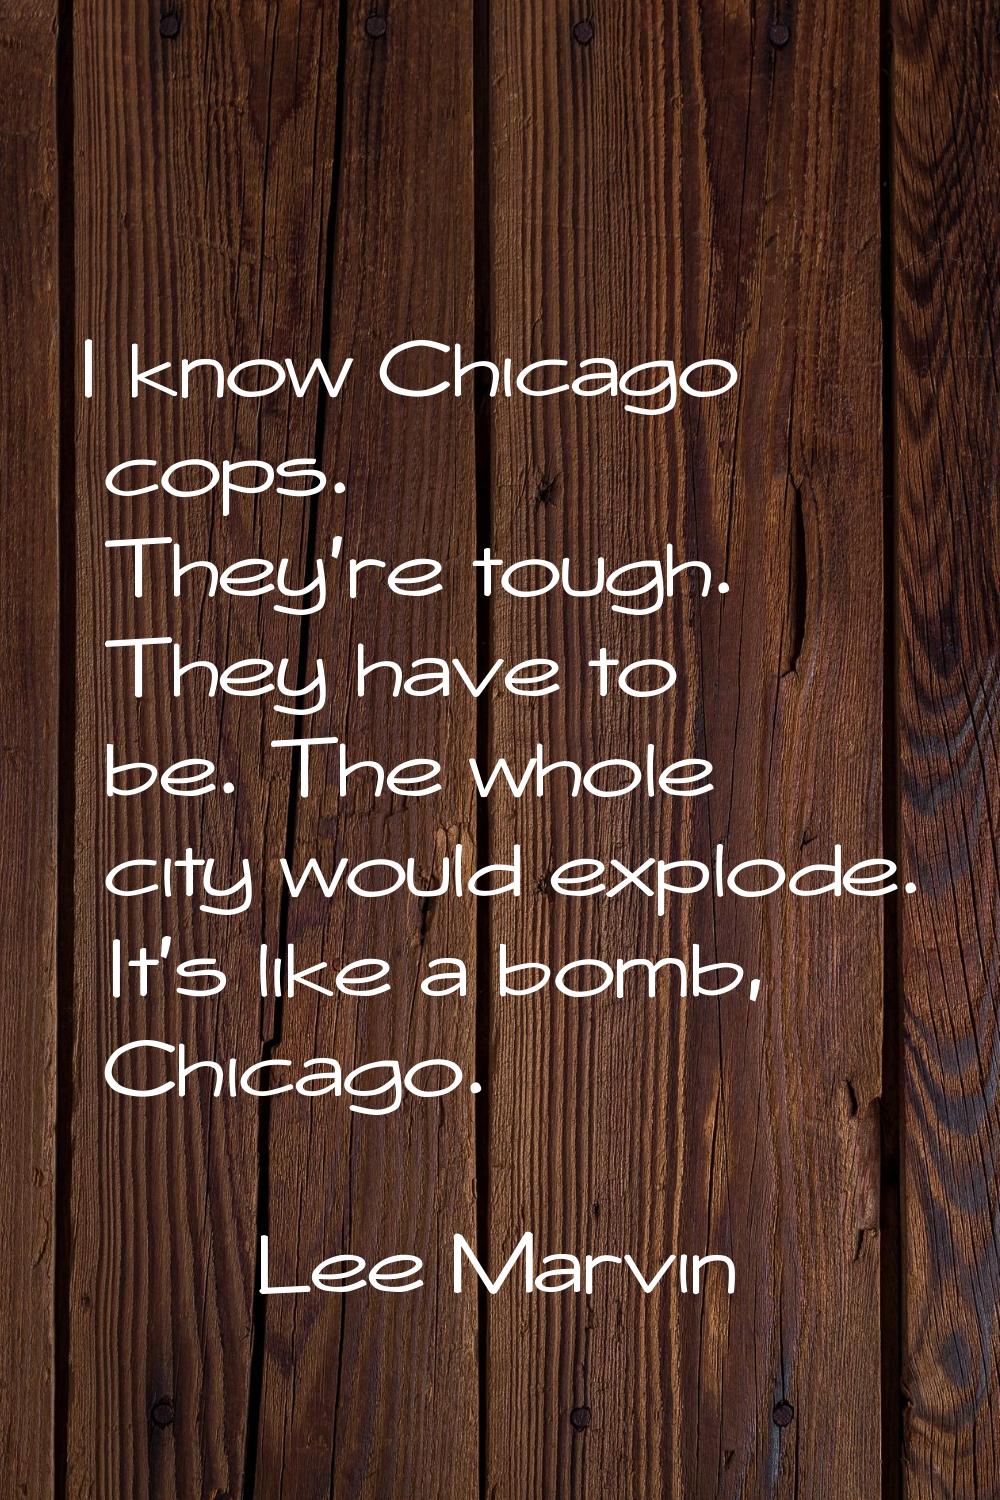 I know Chicago cops. They're tough. They have to be. The whole city would explode. It's like a bomb